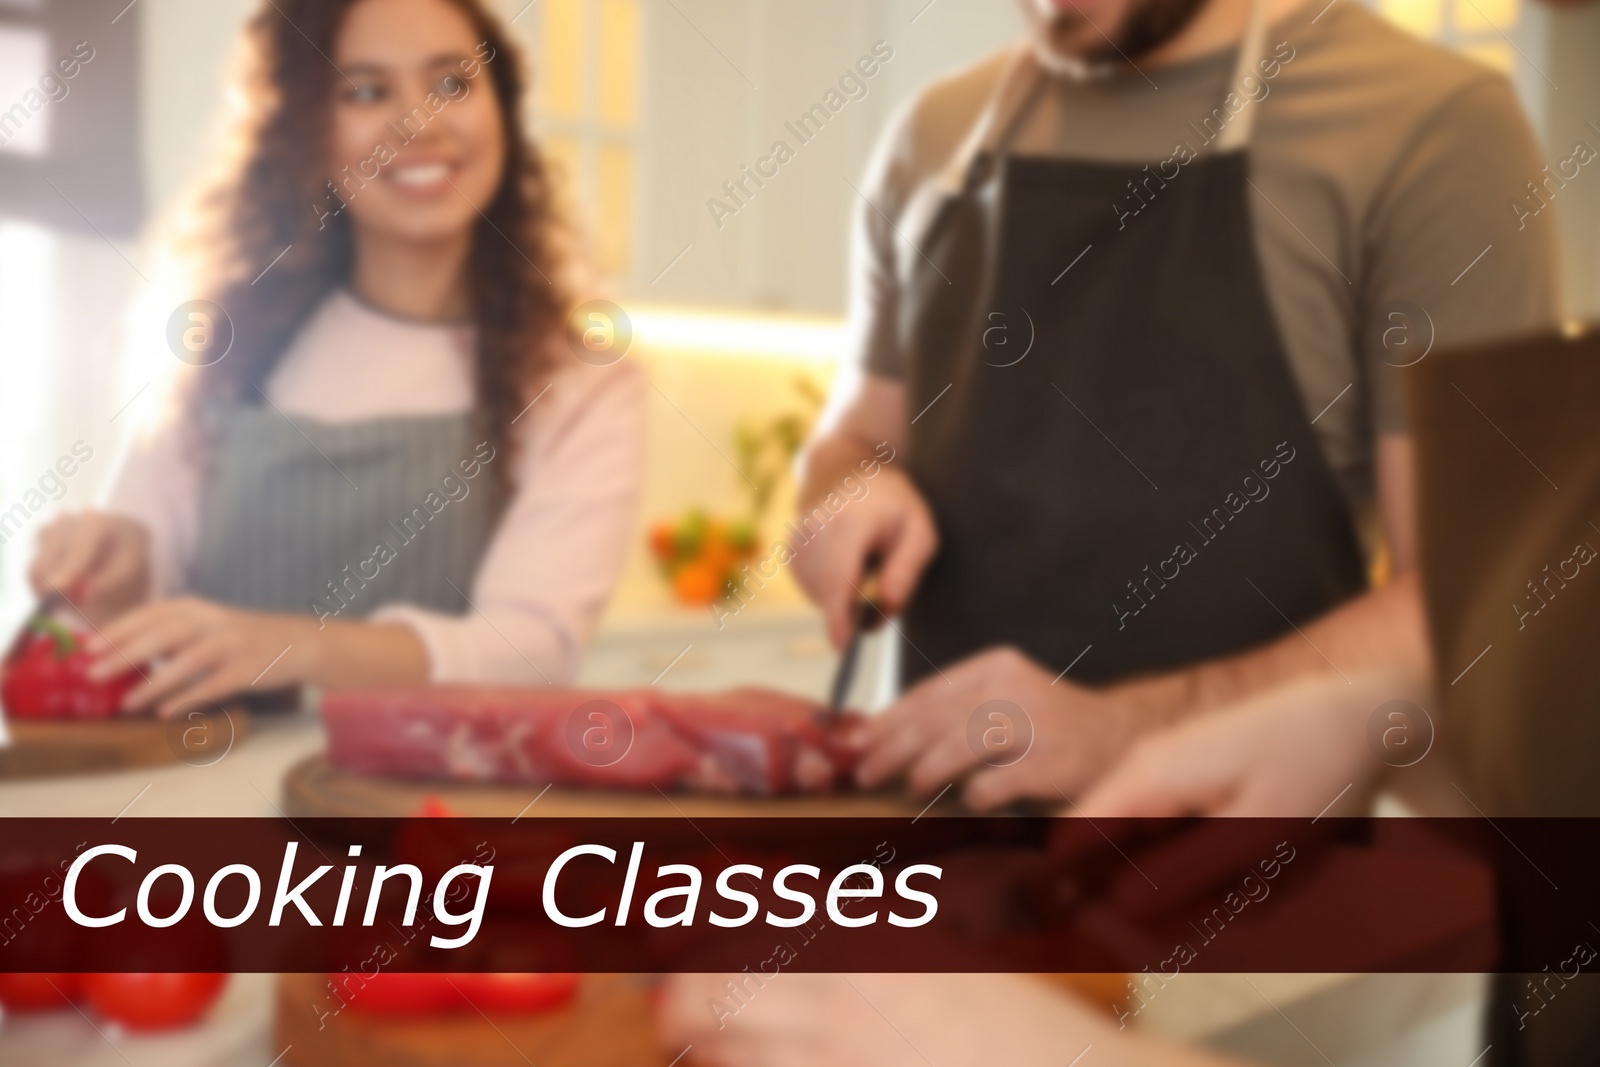 Image of Cooking classes. Blurred view of people cutting meat and vegetables in kitchen